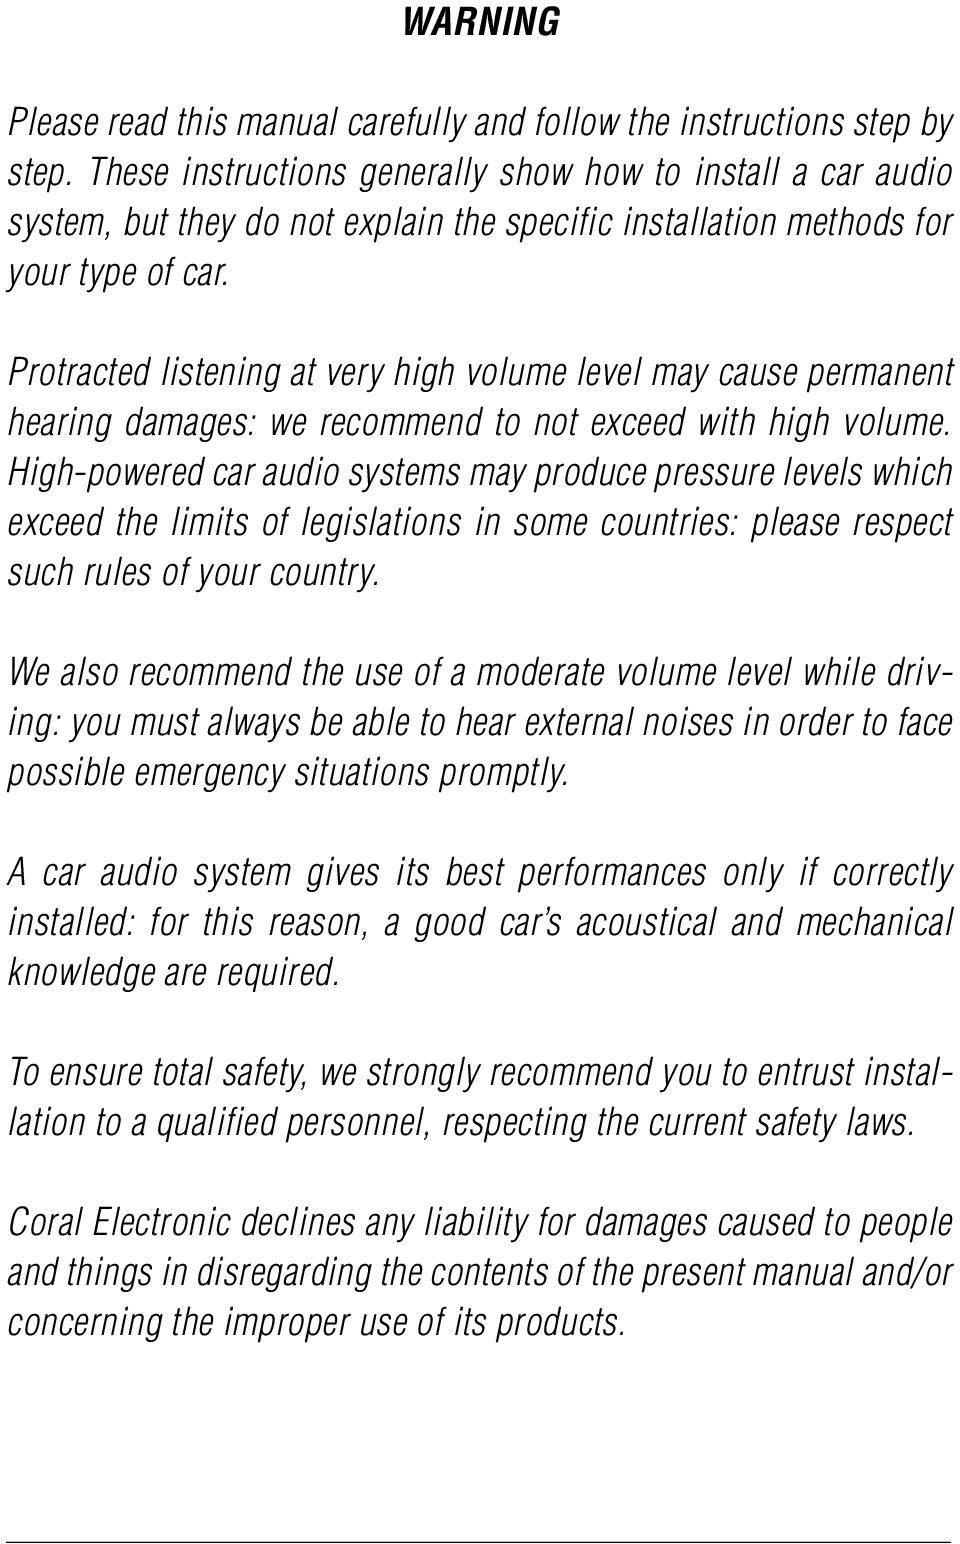 Protracted listening at very high volume level may cause permanent hearing damages: we recommend to not exceed with high volume.